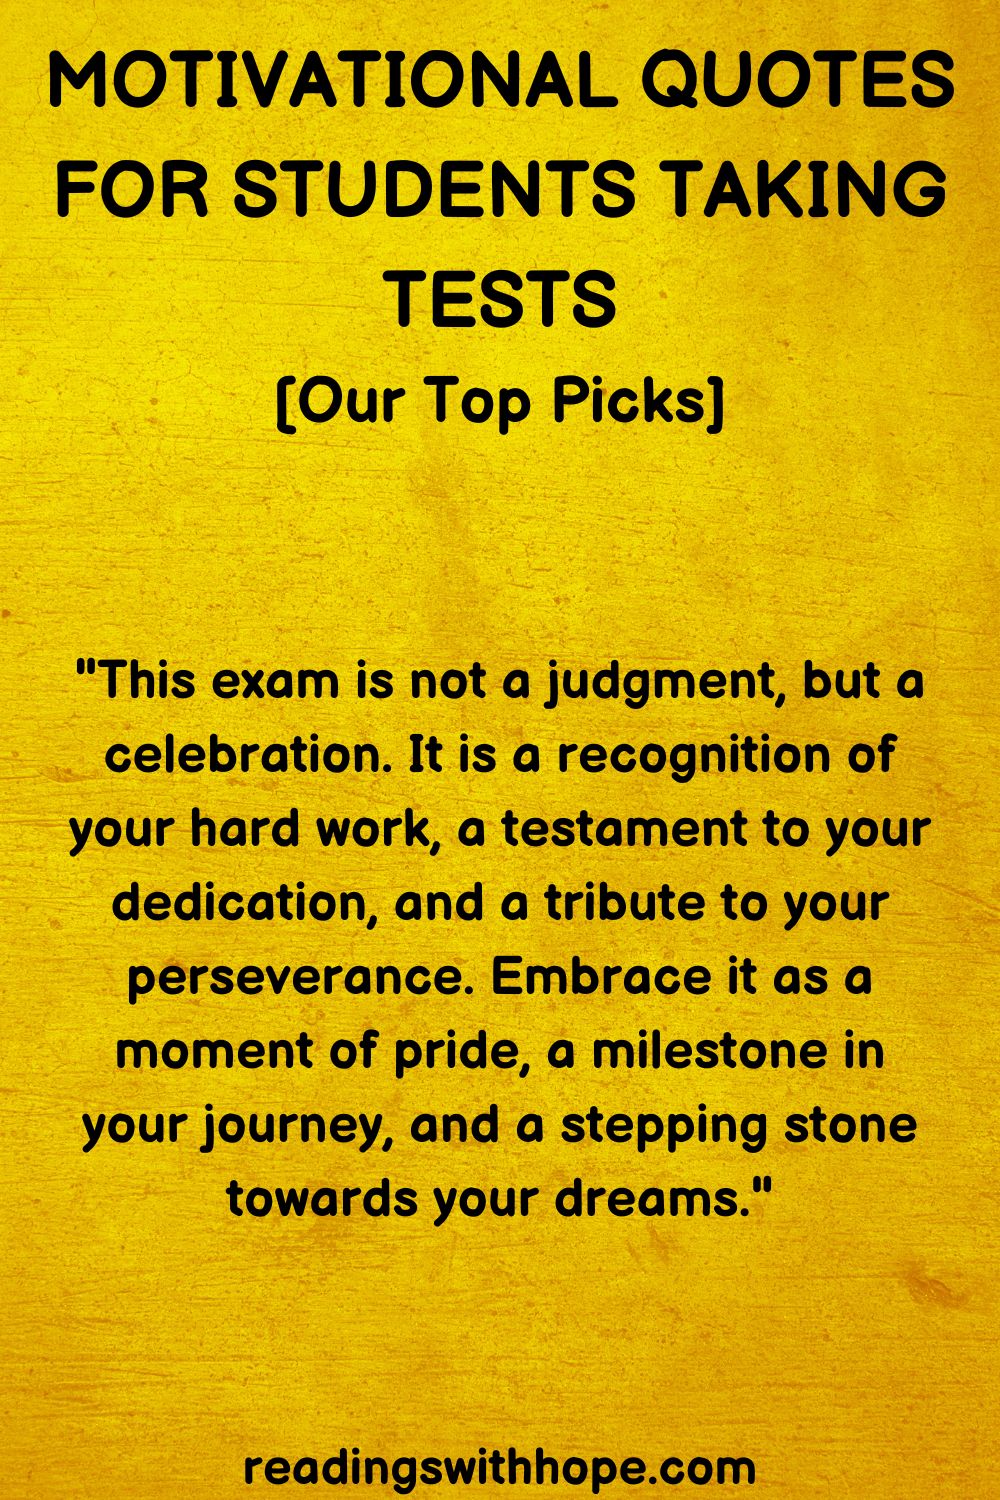 30 Motivational Quotes For Students Taking Tests